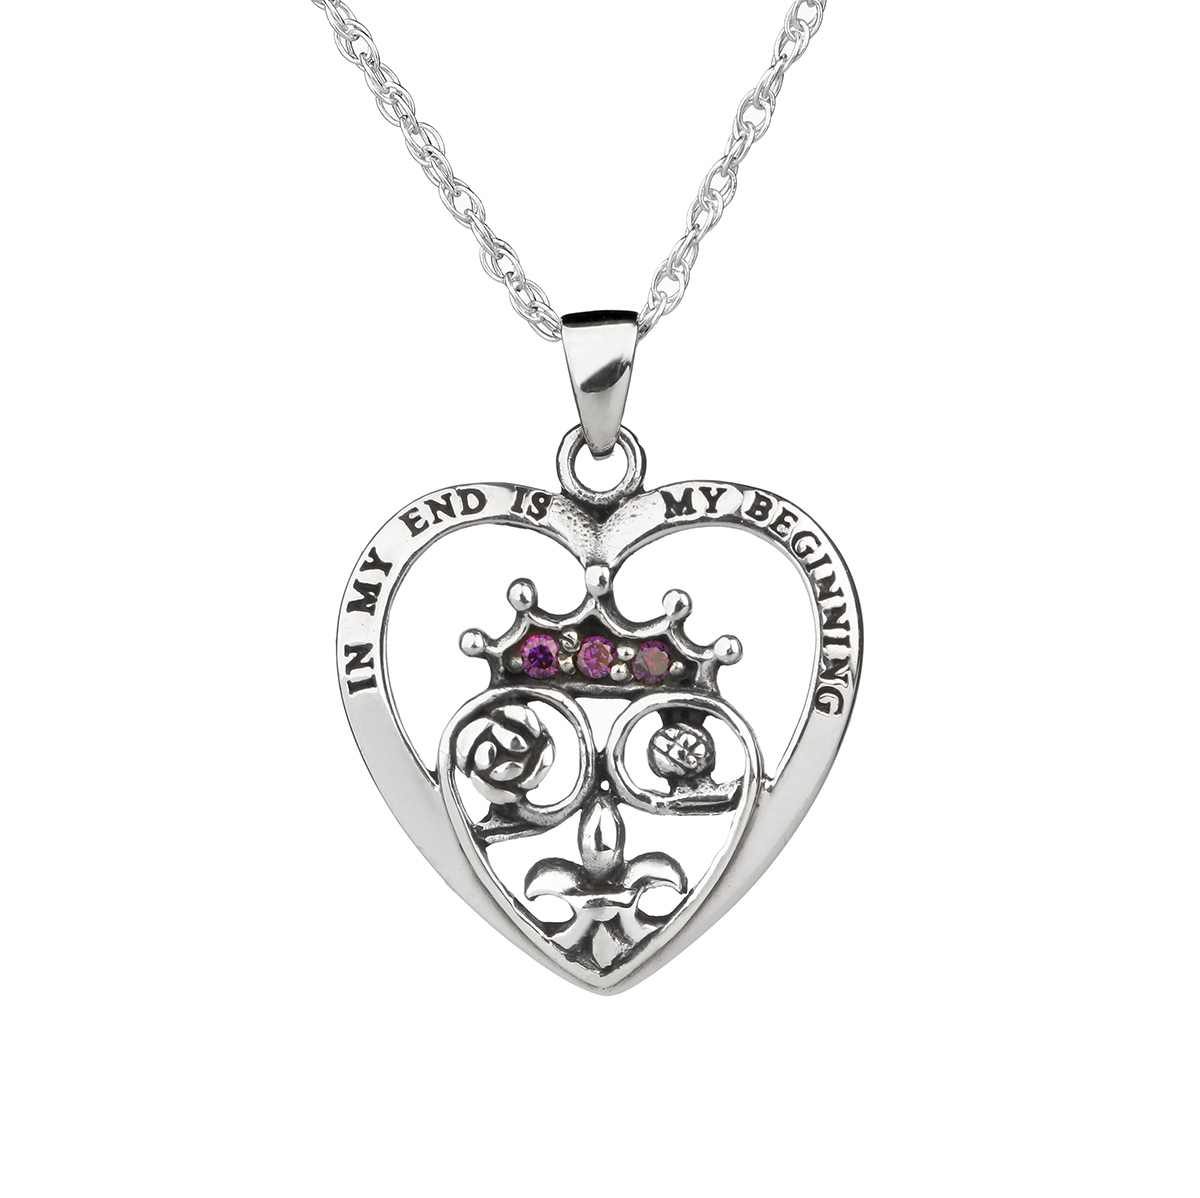 Mary Queen of Scots - Maria Stuart Kette aus Sterling Silber & Kristall